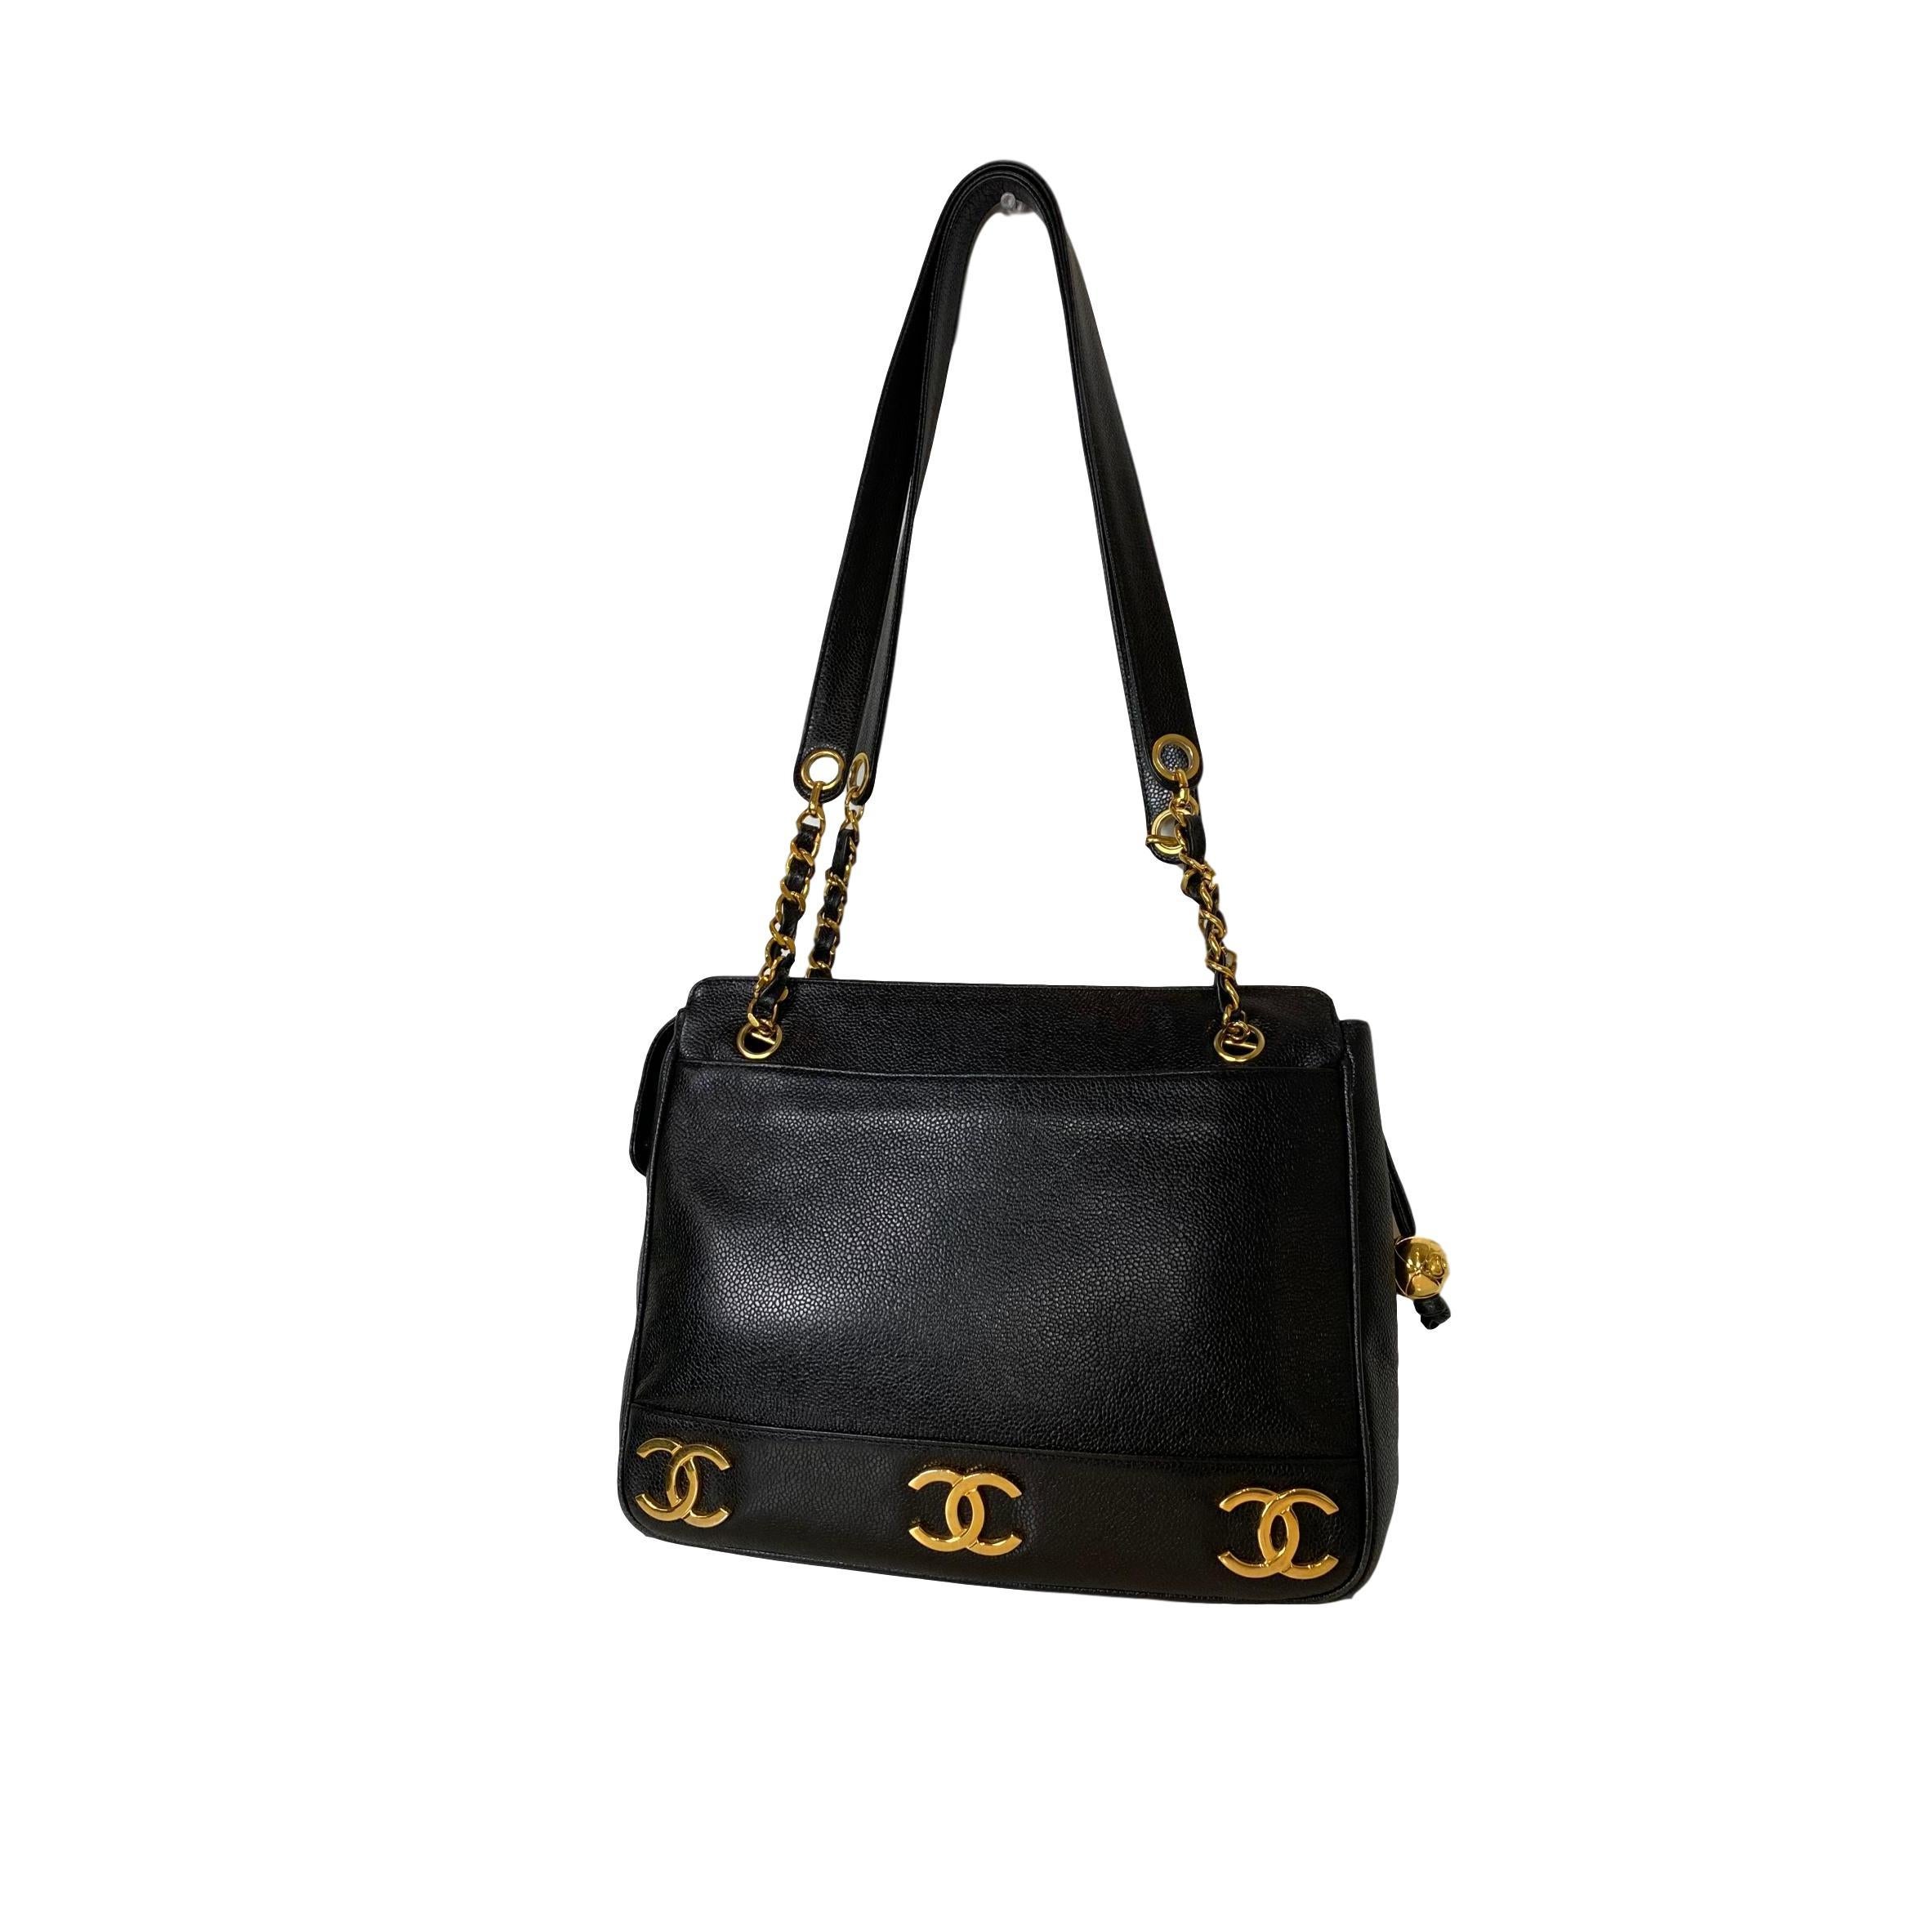 A rare and vintage 1994 Chanel Triple Logo Leather Shoulder Bag in black caviar leather and lambskin, adorned with three 24K gold-plated iconic 'CC' Logos on both sides of the bag.  The Chanel logo, arguably the most recognized logo in the world,